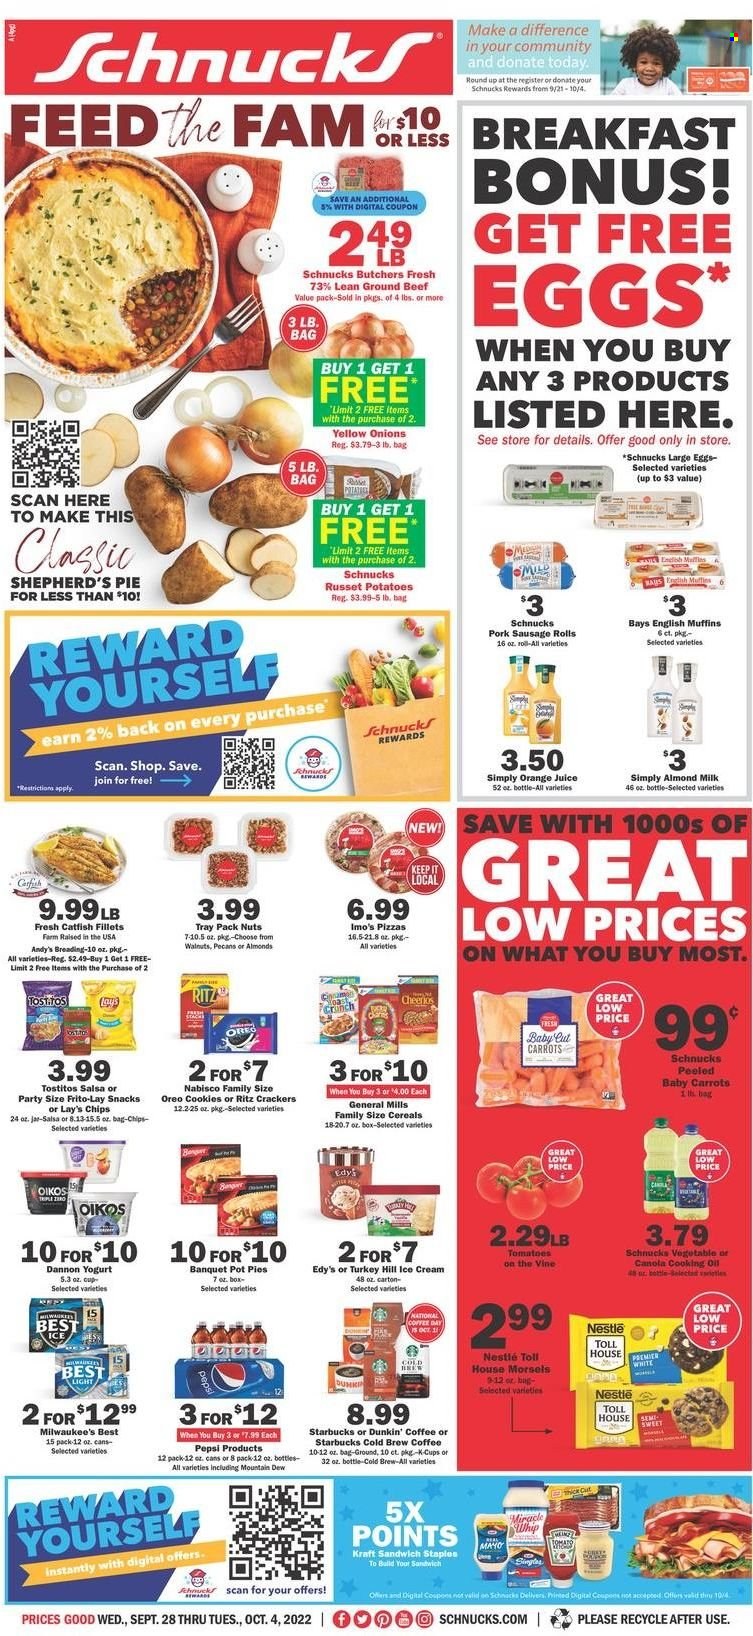 thumbnail - Schnucks Flyer - 09/28/2022 - 10/04/2022 - Sales products - english muffins, sausage rolls, pie, pot pie, carrots, russet potatoes, tomatoes, potatoes, onion, catfish, pizza, Kraft®, sausage, pork sausage, Oreo, yoghurt, Oikos, Dannon, almond milk, milk, large eggs, mayonnaise, Miracle Whip, ice cream, cookies, Nestlé, snack, crackers, RITZ, chips, Lay’s, Frito-Lay, Tostitos, Cheerios, salsa, oil, cooking oil, walnuts, pecans, Mountain Dew, Pepsi, orange juice, juice, coffee, Starbucks, coffee capsules, K-Cups, beef meat, ground beef. Page 1.